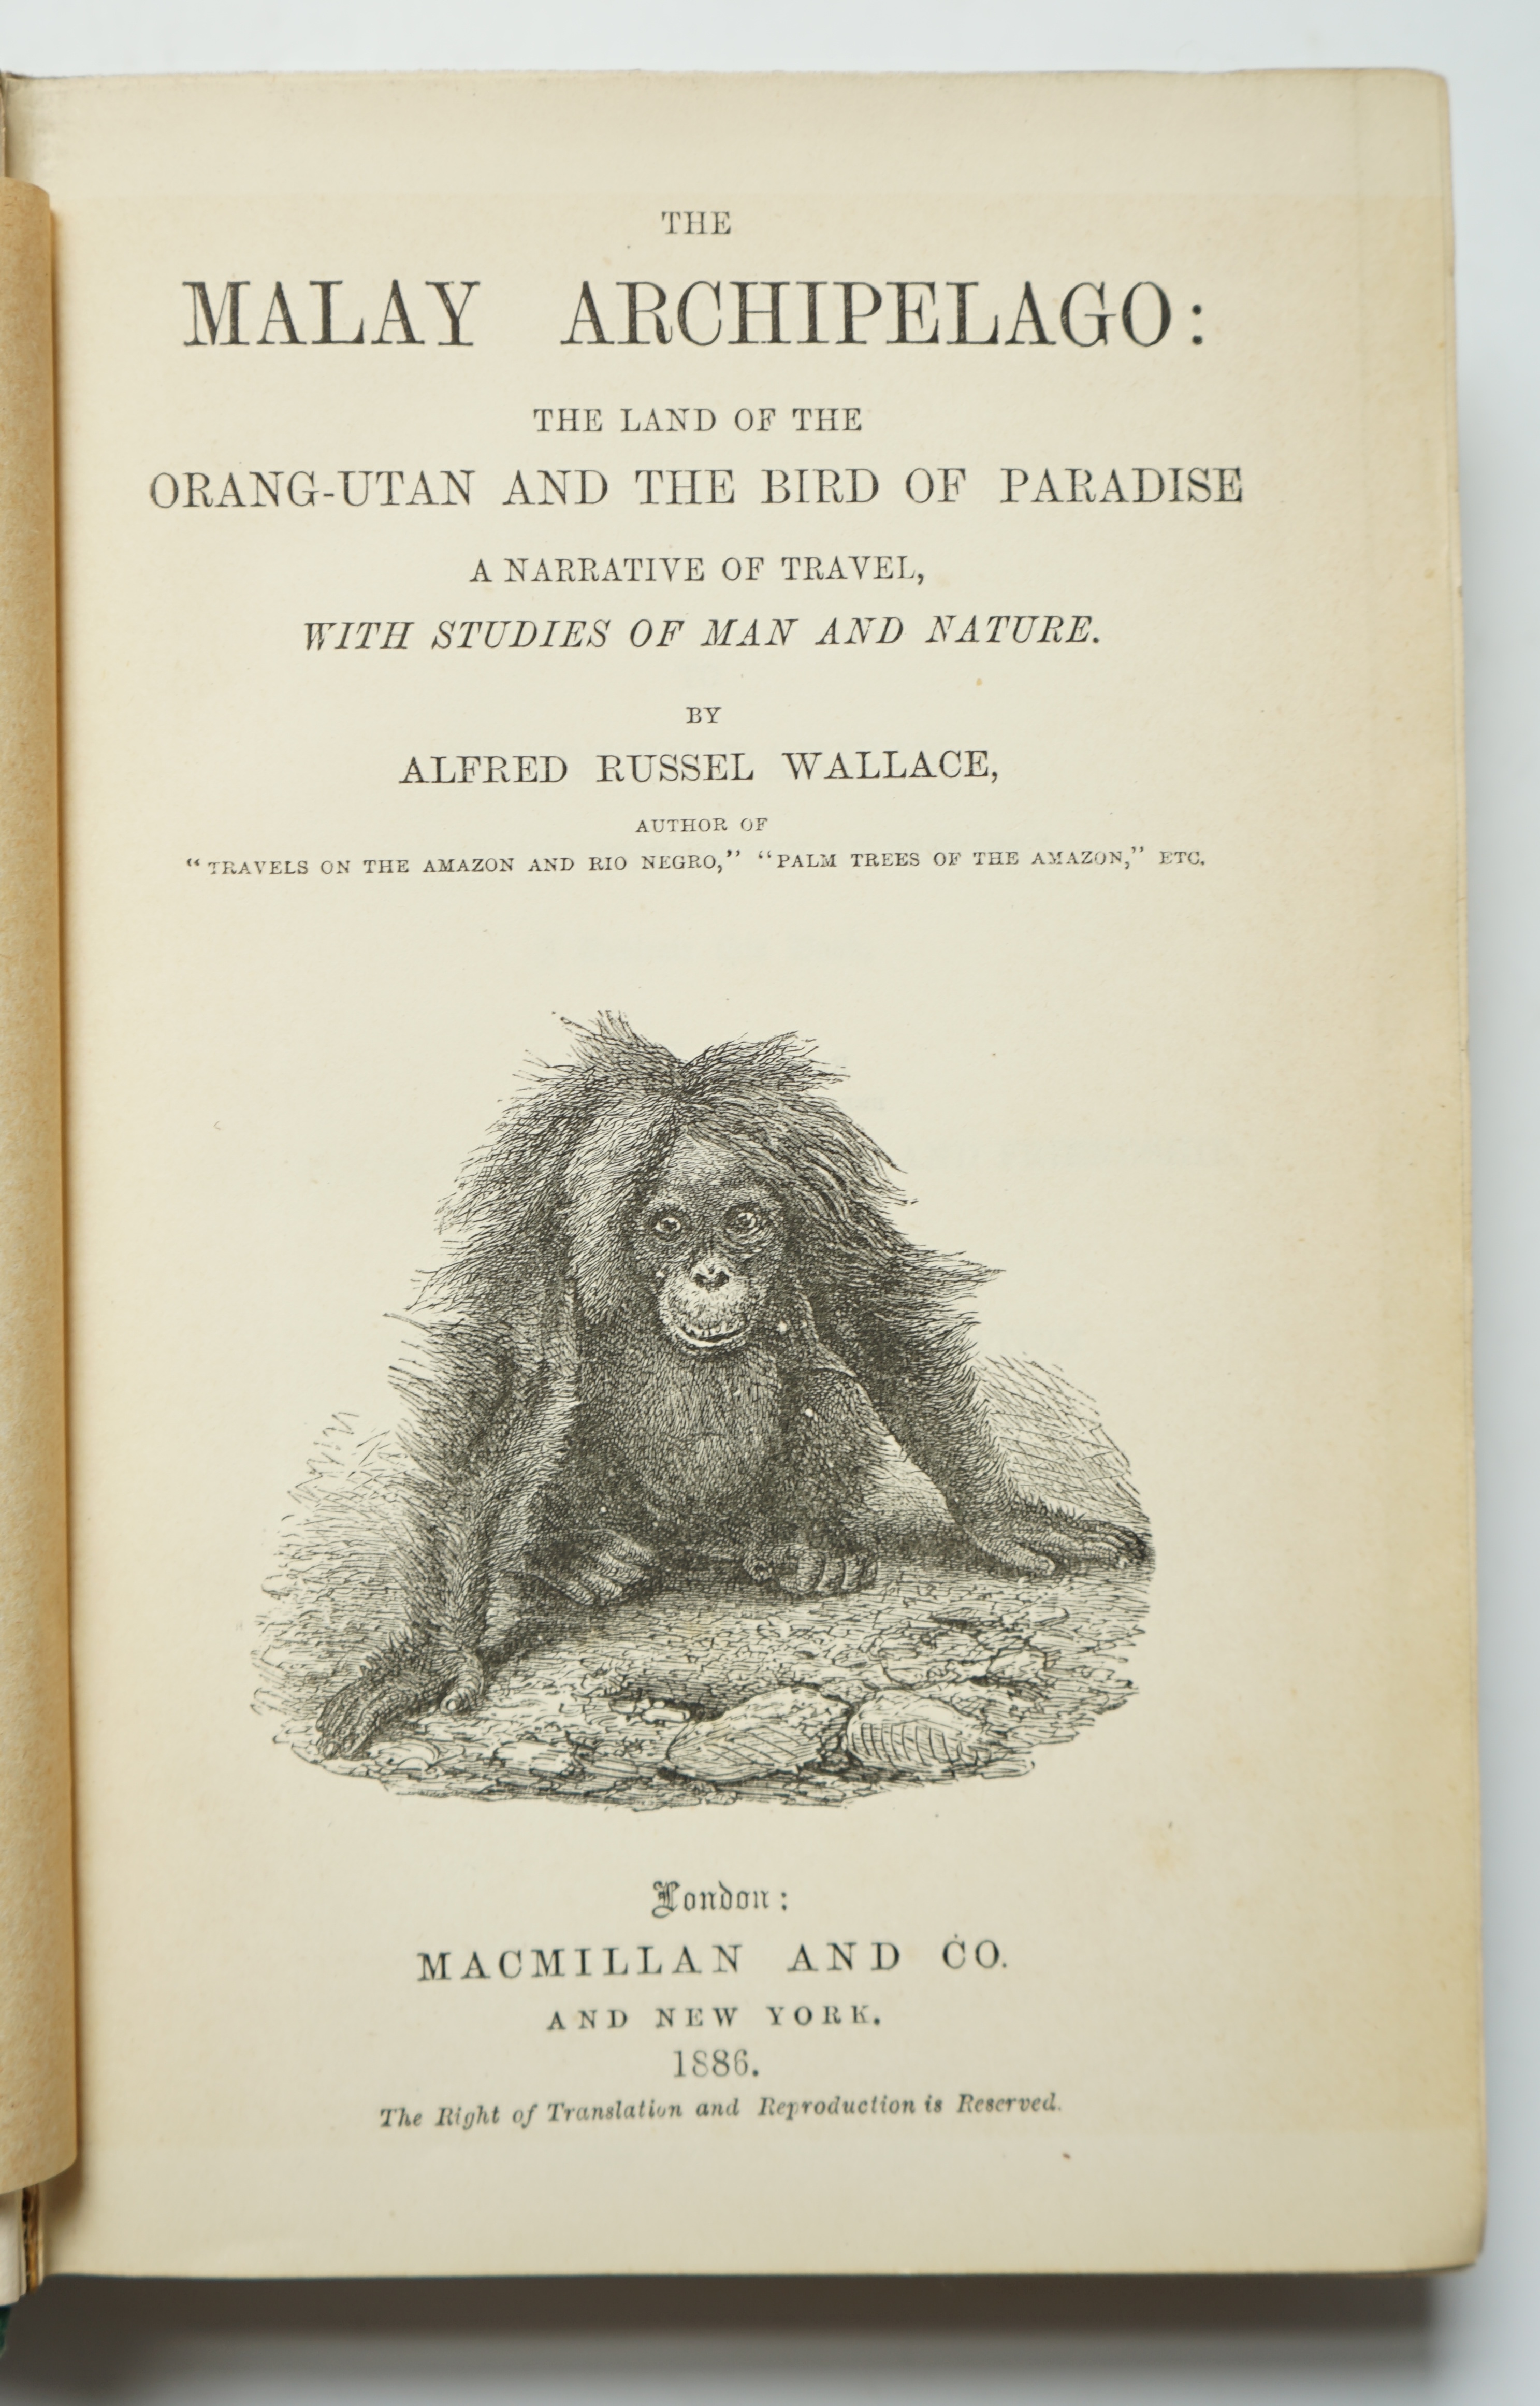 Wallace, Alfred Russel - The Malay Archipelago: The Land of the Orang-utan and the Bird of Paradise. A Narrative of Travel, with Studies of Man and Nature, engraved plates within text, engraved title page, frontispiece,